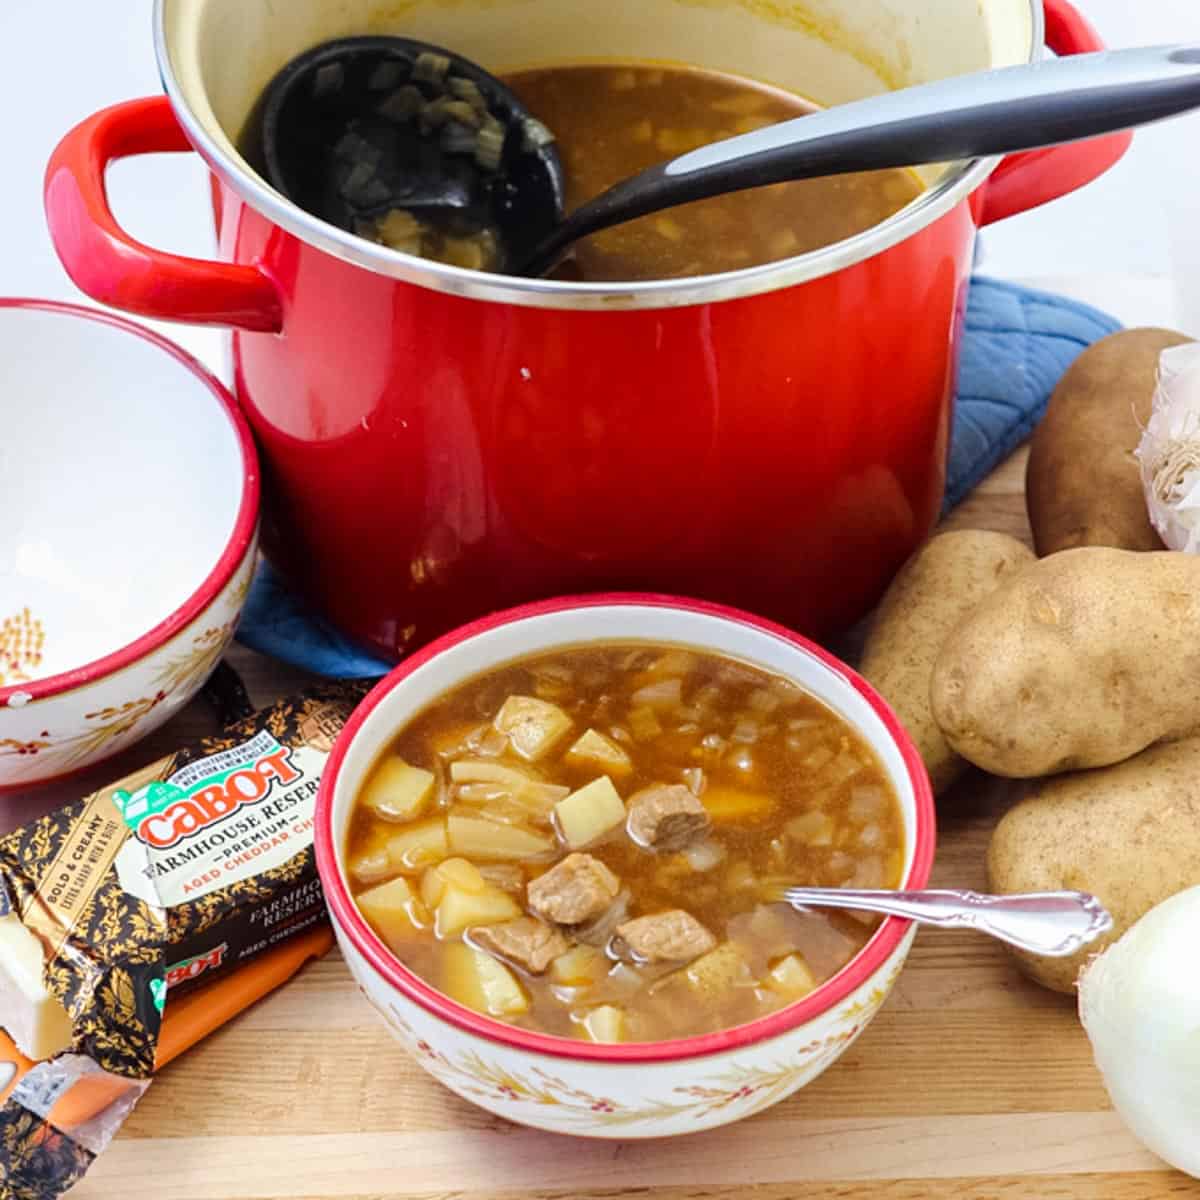 red pot of soup with a black ladle next to potatoes, block of cheese, and a patterned bowl full of steak potato soup